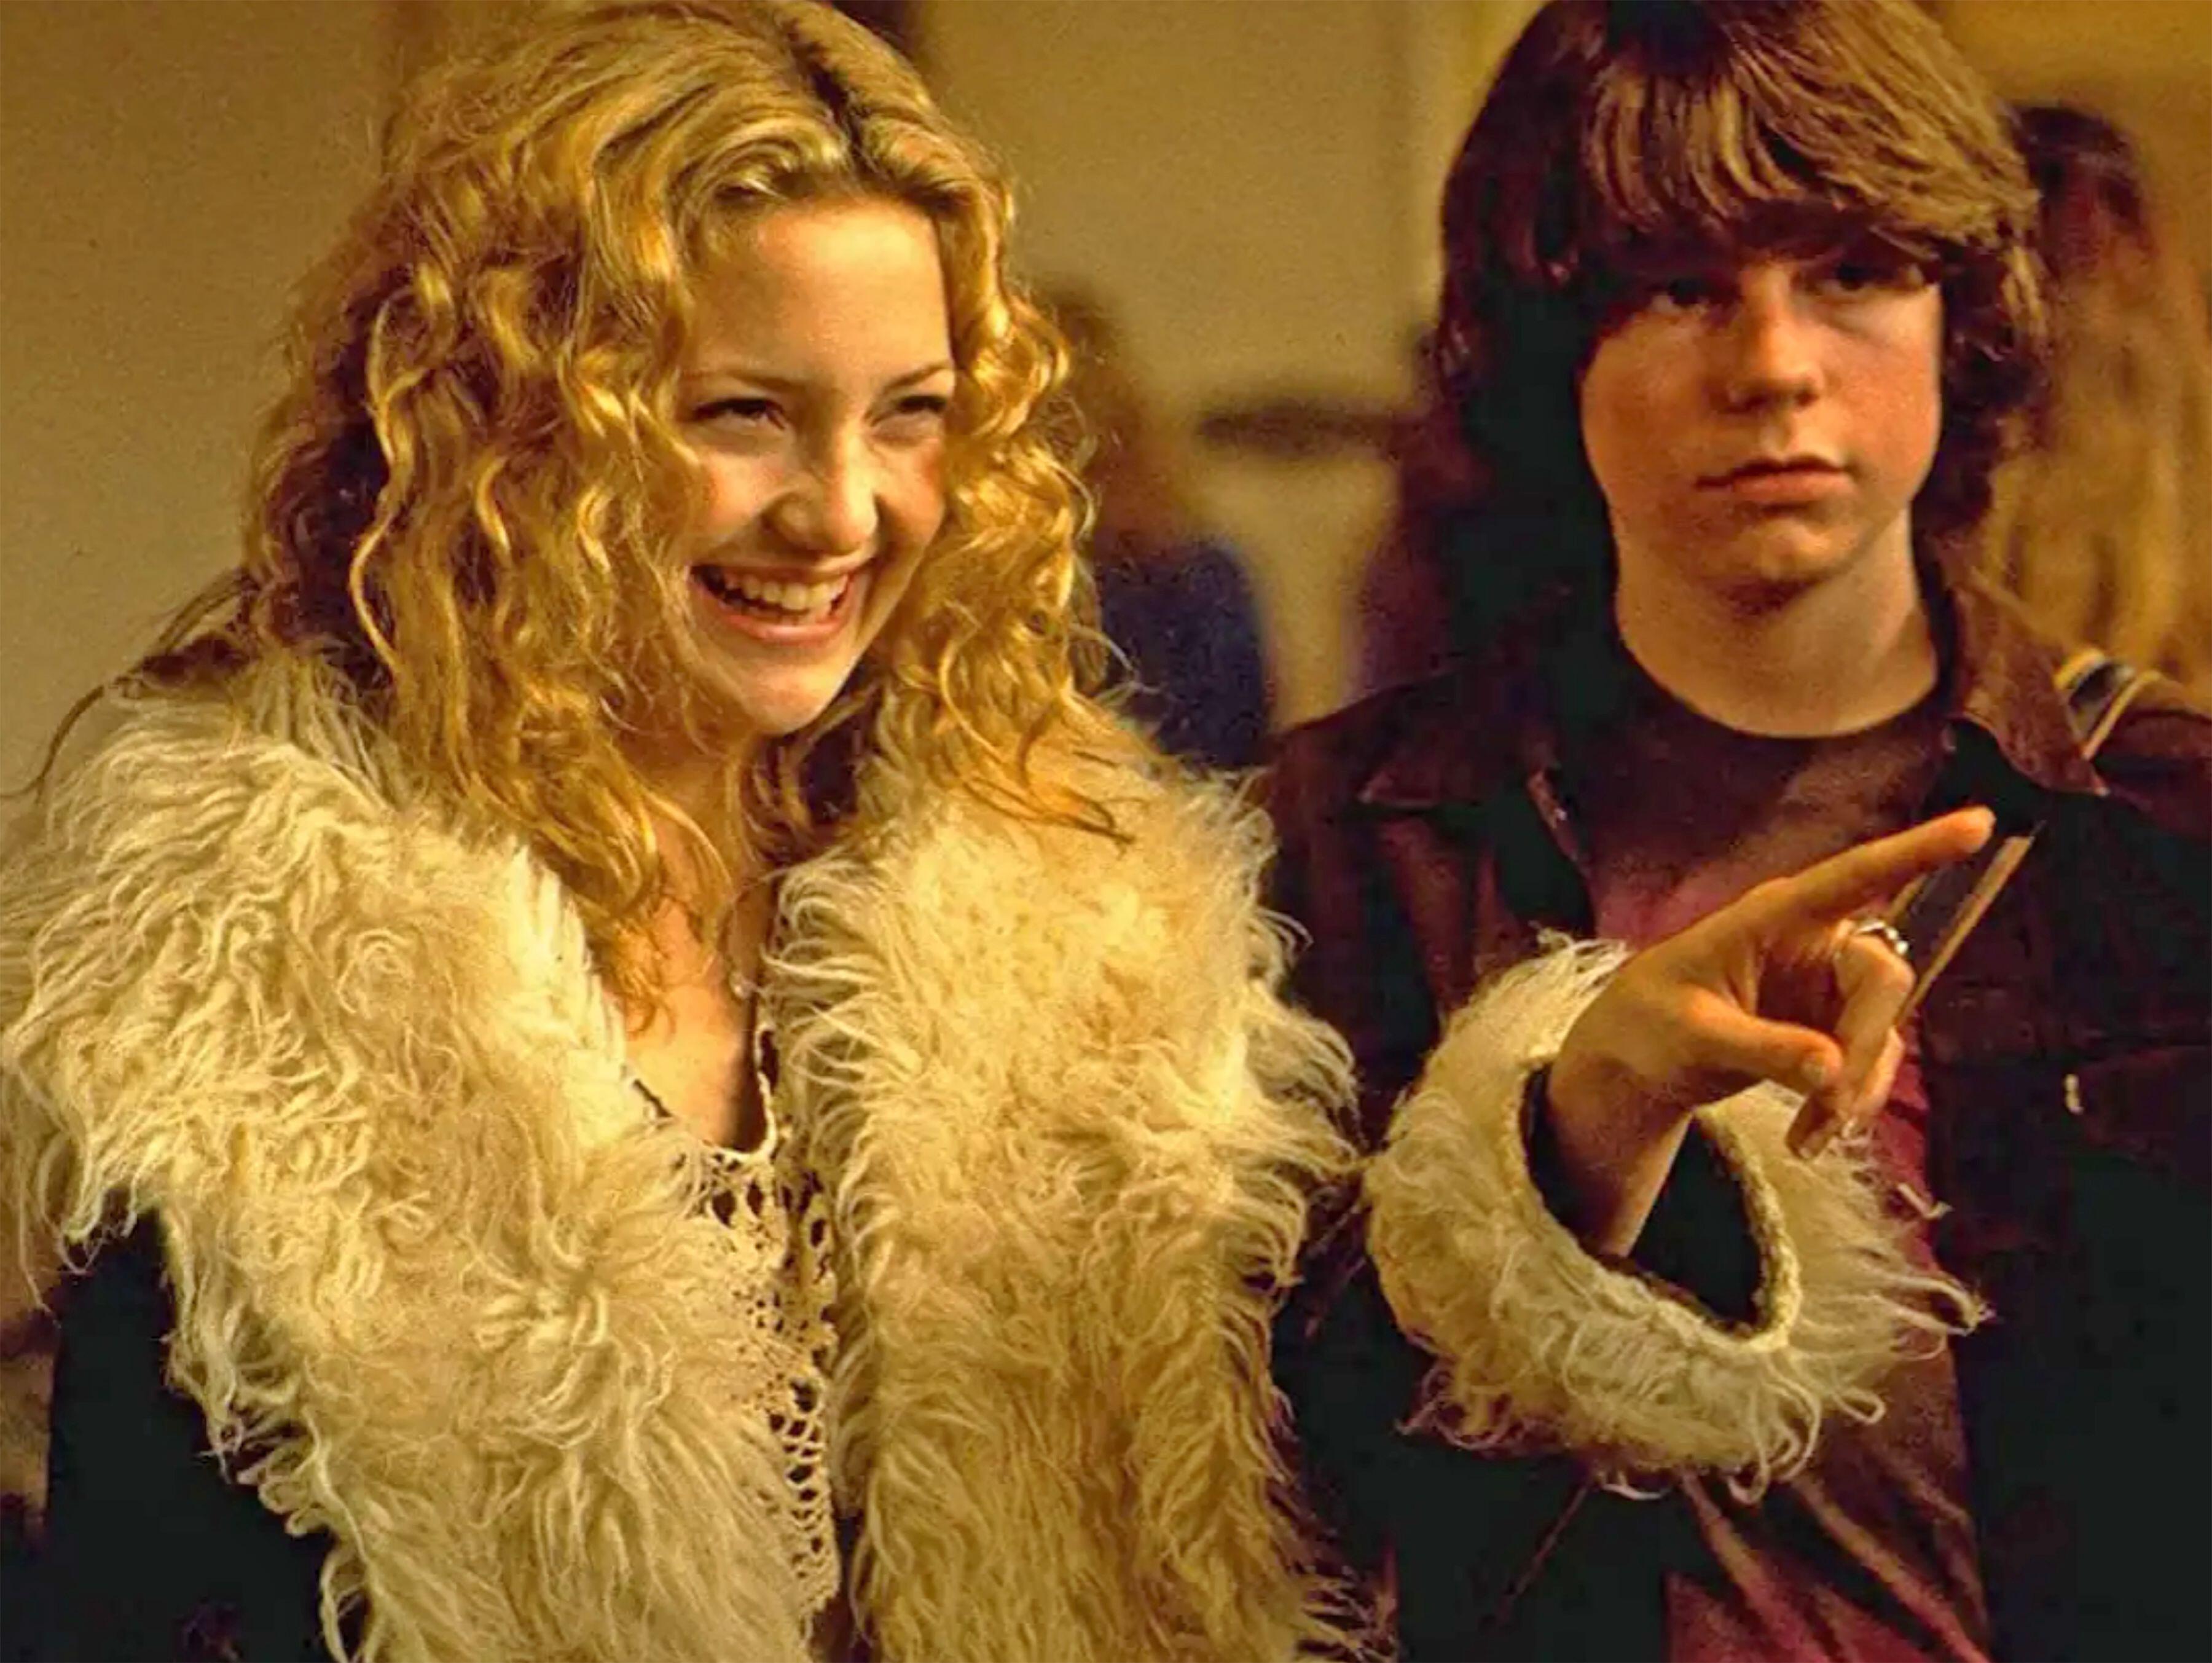 Kate Hudson and Patrick Fugit appeared in the 2000 drama, Almost Famous